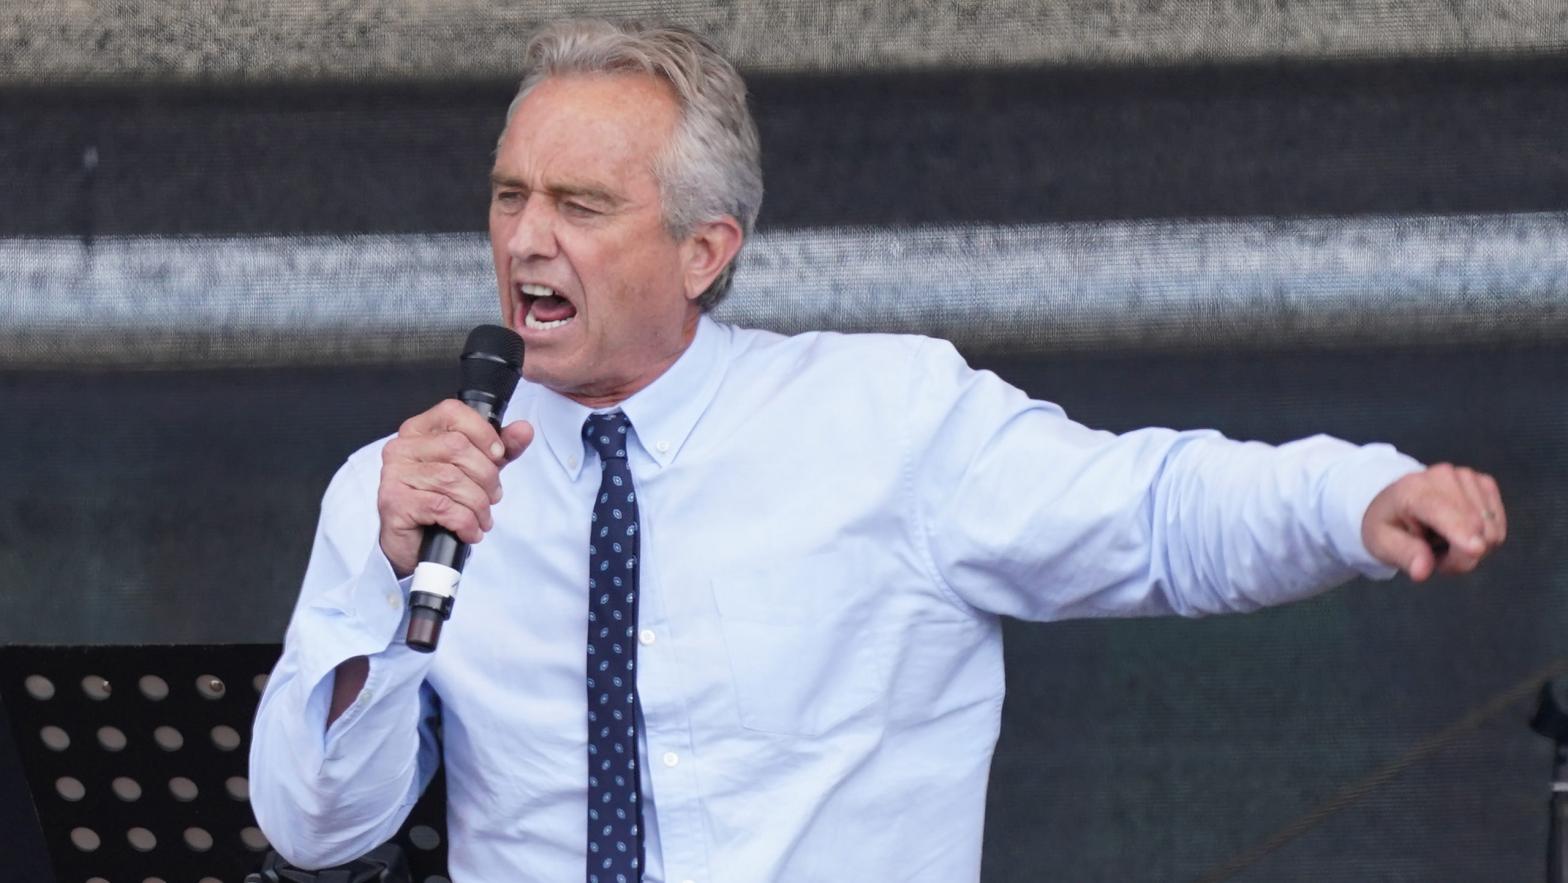 Anti-vax conspiracist Robert F. Kennedy Jr. in Berlin in August 2020. (Photo: Sean Gallup, Getty Images)